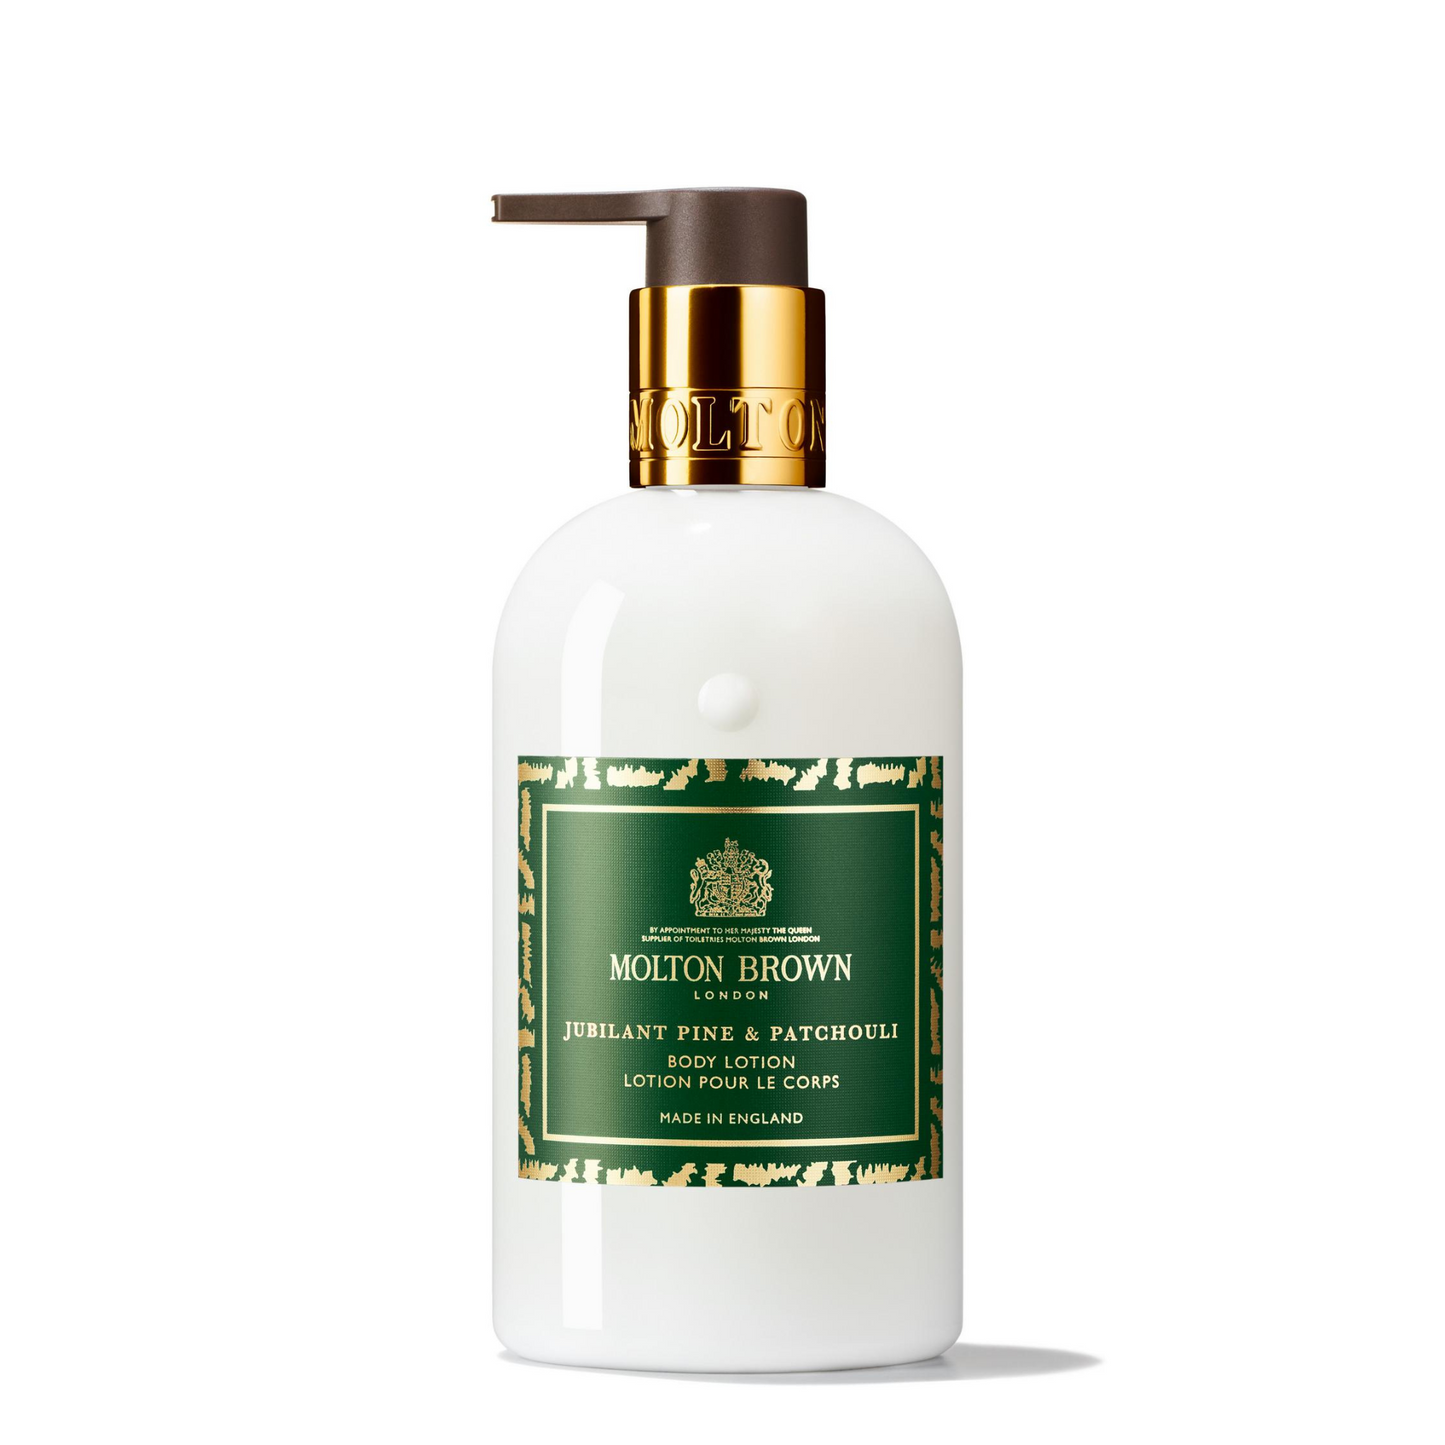 Primary Image of Holiday Jubilant Pine and Patchouli Body Lotion (300 ml)